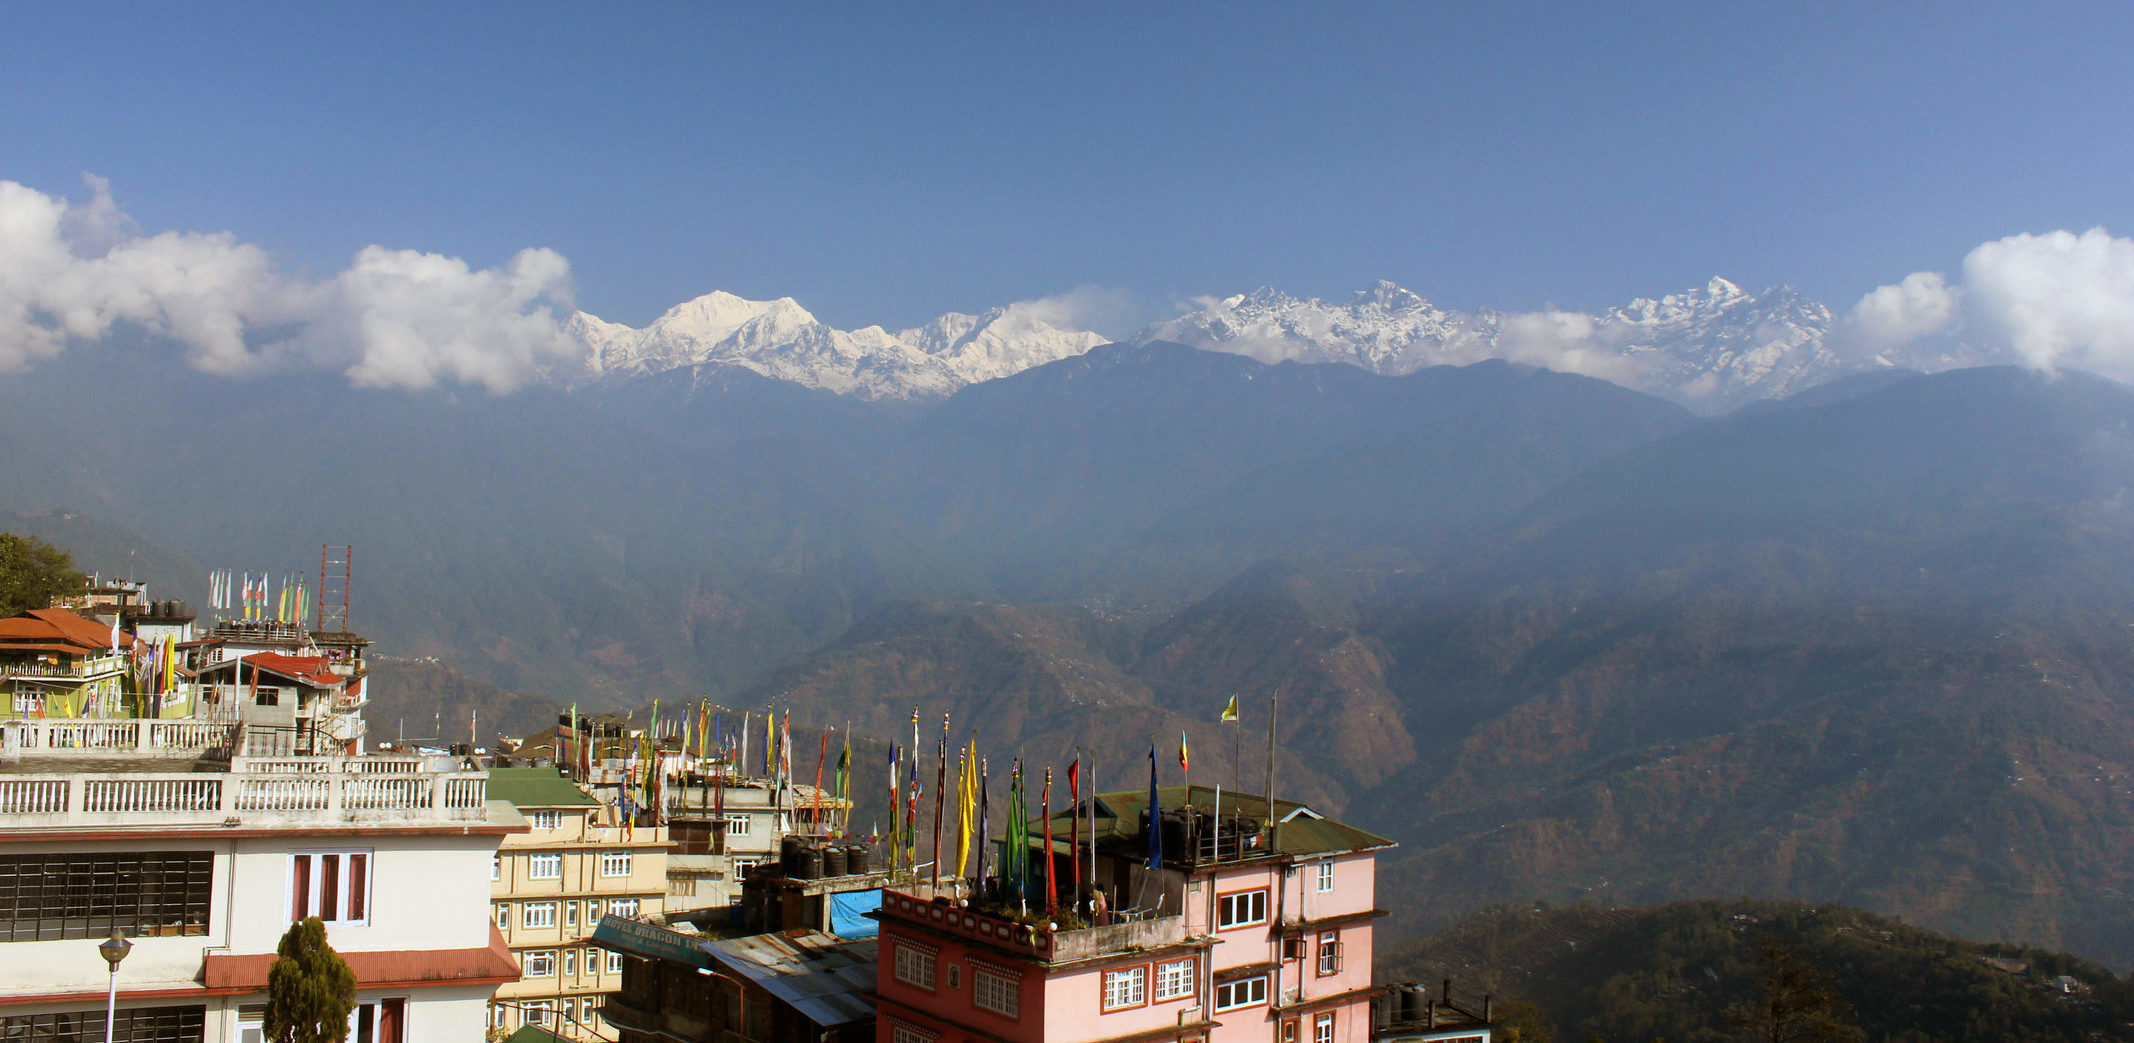 Experience extraordinary Indian landscapes like these teetering Kanchenjunga mountains when you take a tailor-made holiday to Pelling with Alfred&.